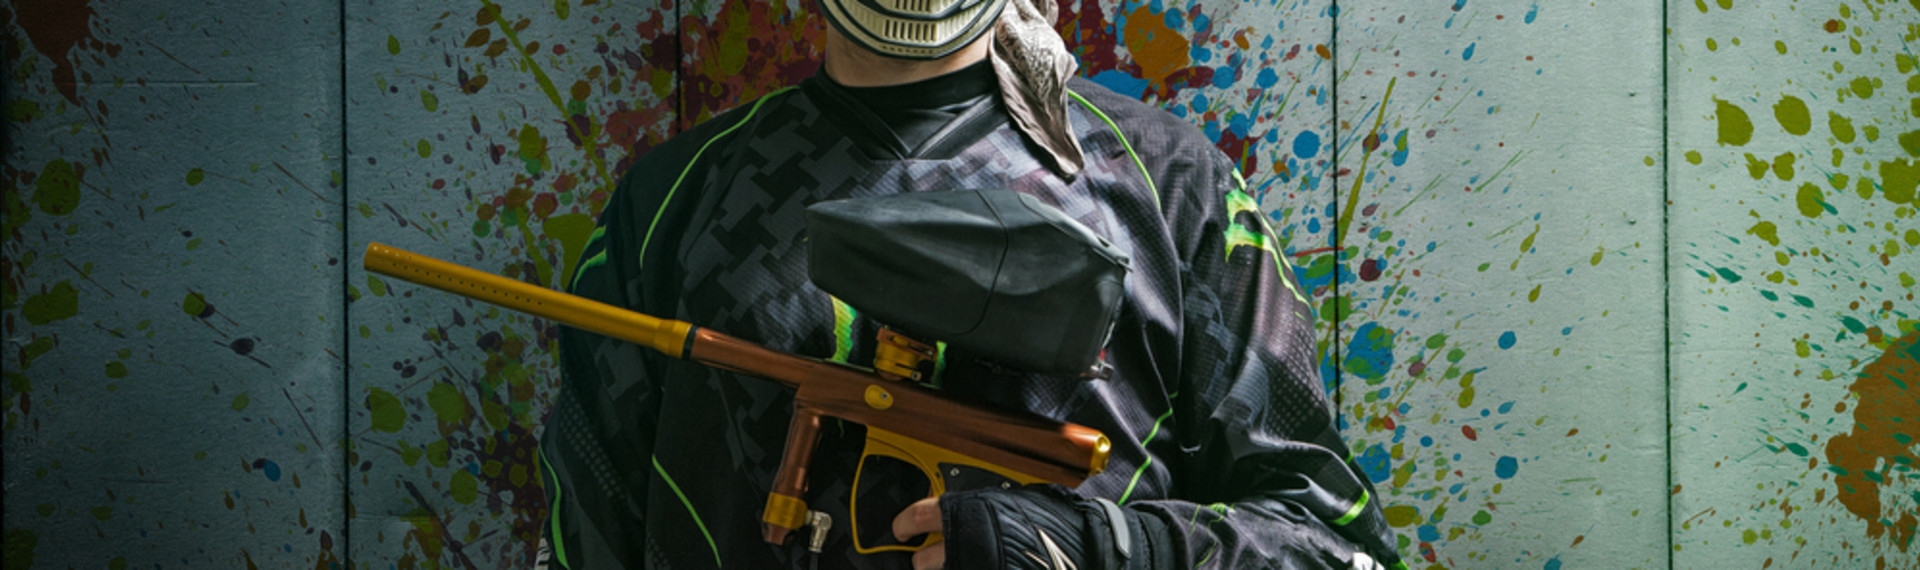 Paintball Indoor Munich | Pissup Tours